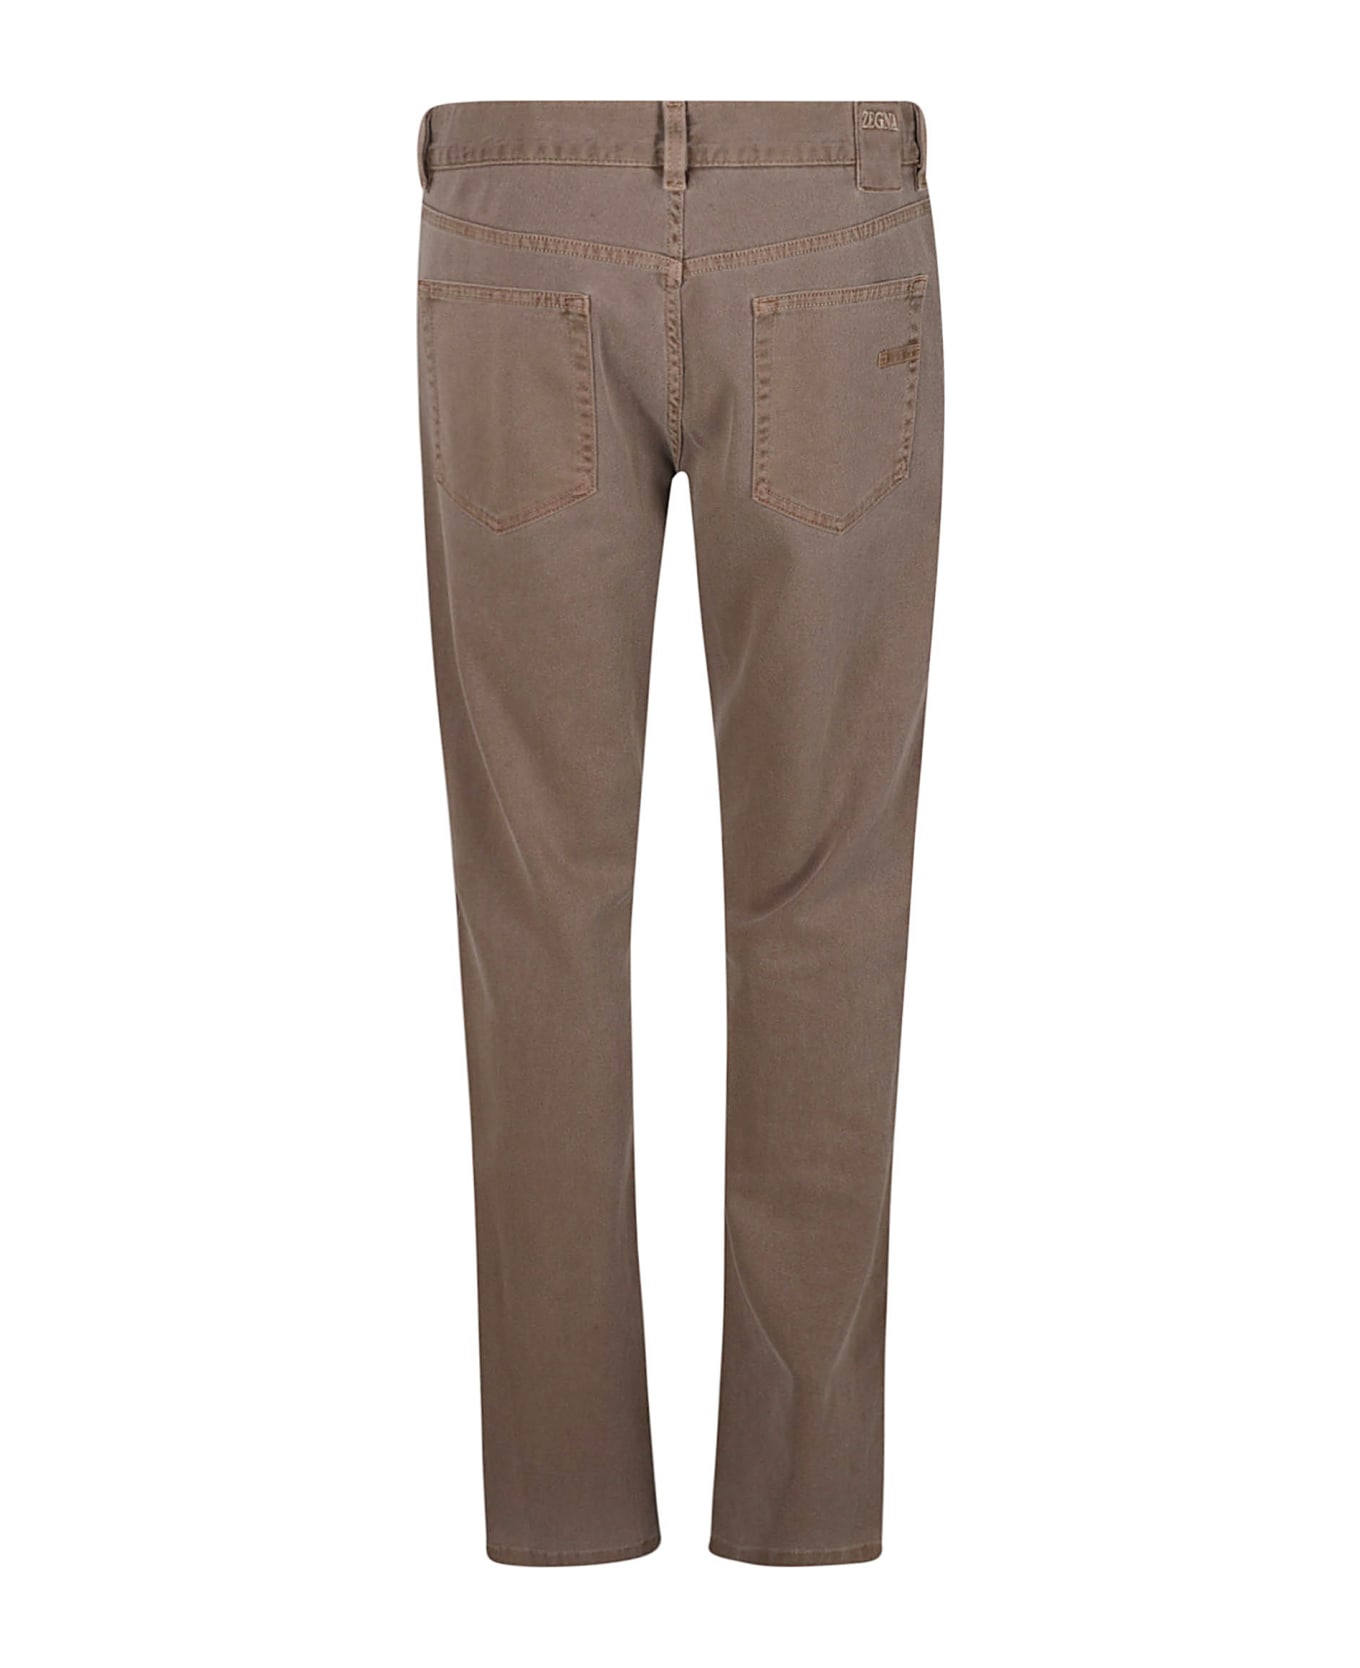 Zegna City Button Fitted Jeans - Brown デニム